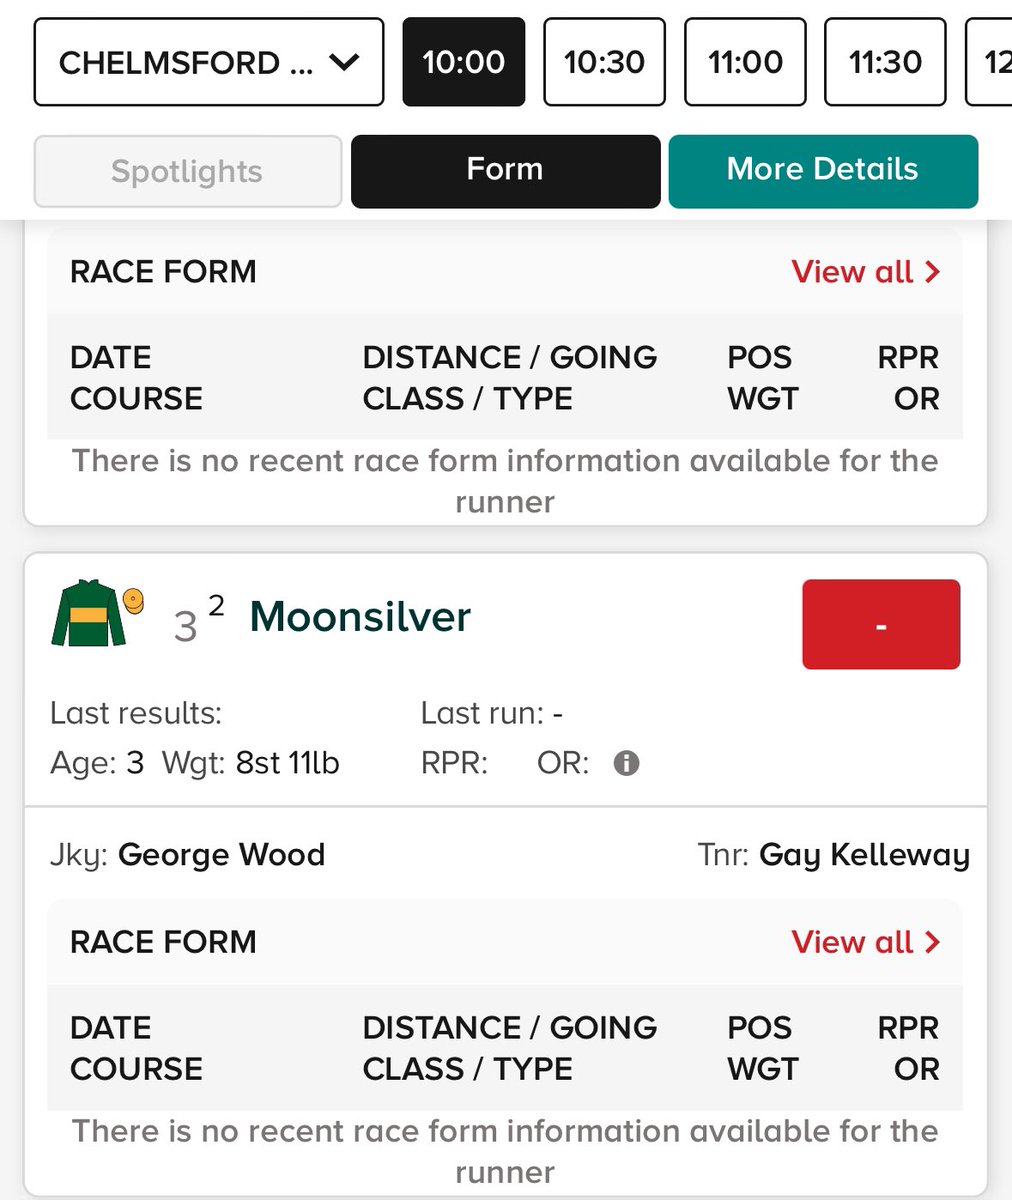 Our very first runner tomorrow 💚🧡 Moonsilver makes her debut in the 10:00 at Chelmsford. Tough race but 🤞🏻 she runs a nice race and comes back safe and sound @GayKelleway #propulsionracing #firstrunner #excitingtimes